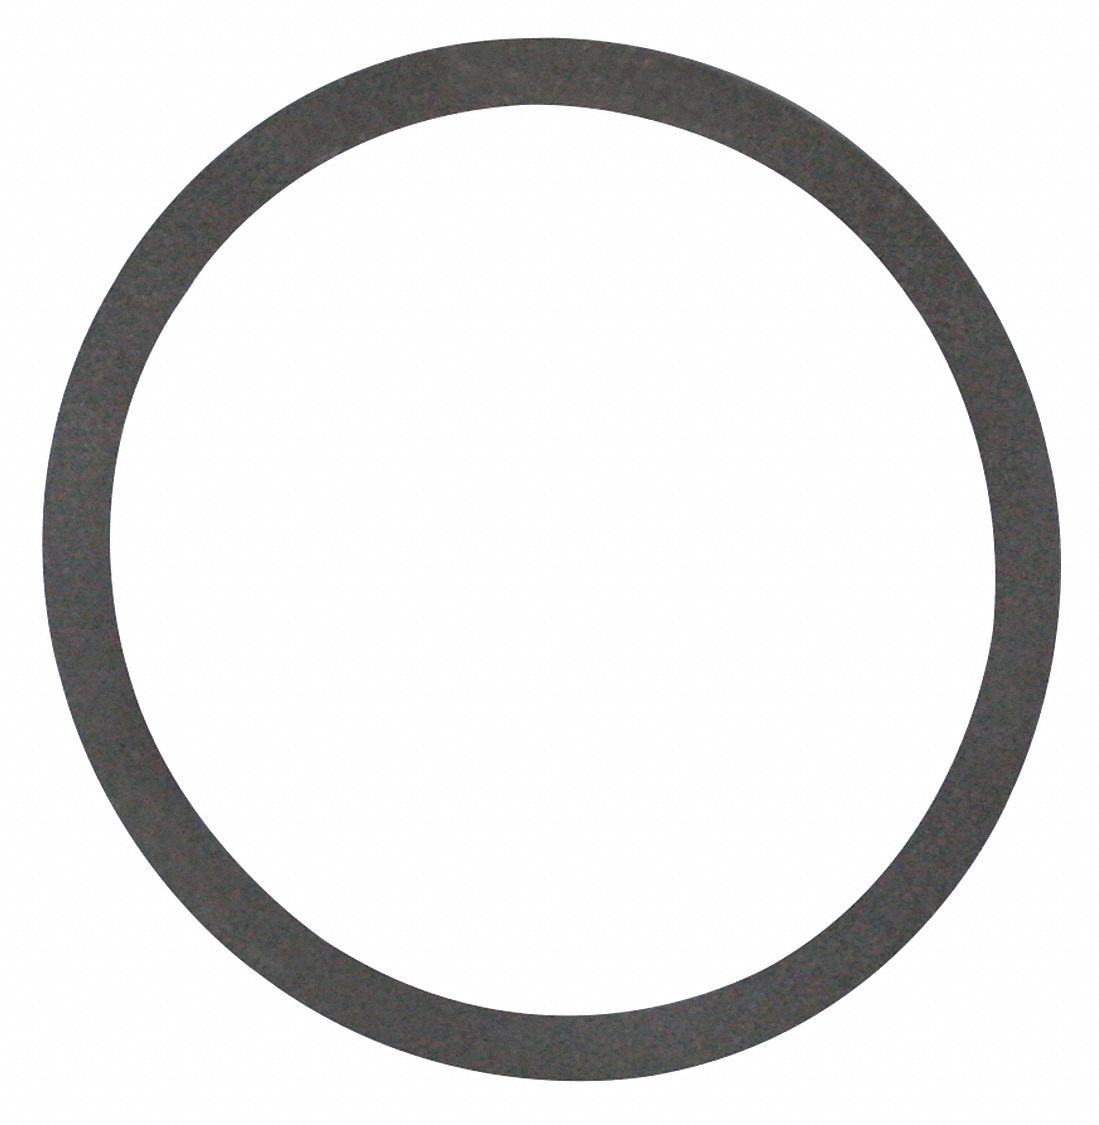 Gasket: 2 1/2 in Tube Size, 2.4063 in Inside Dia., 2.7656 in Outside Dia., 5/64 in Thick